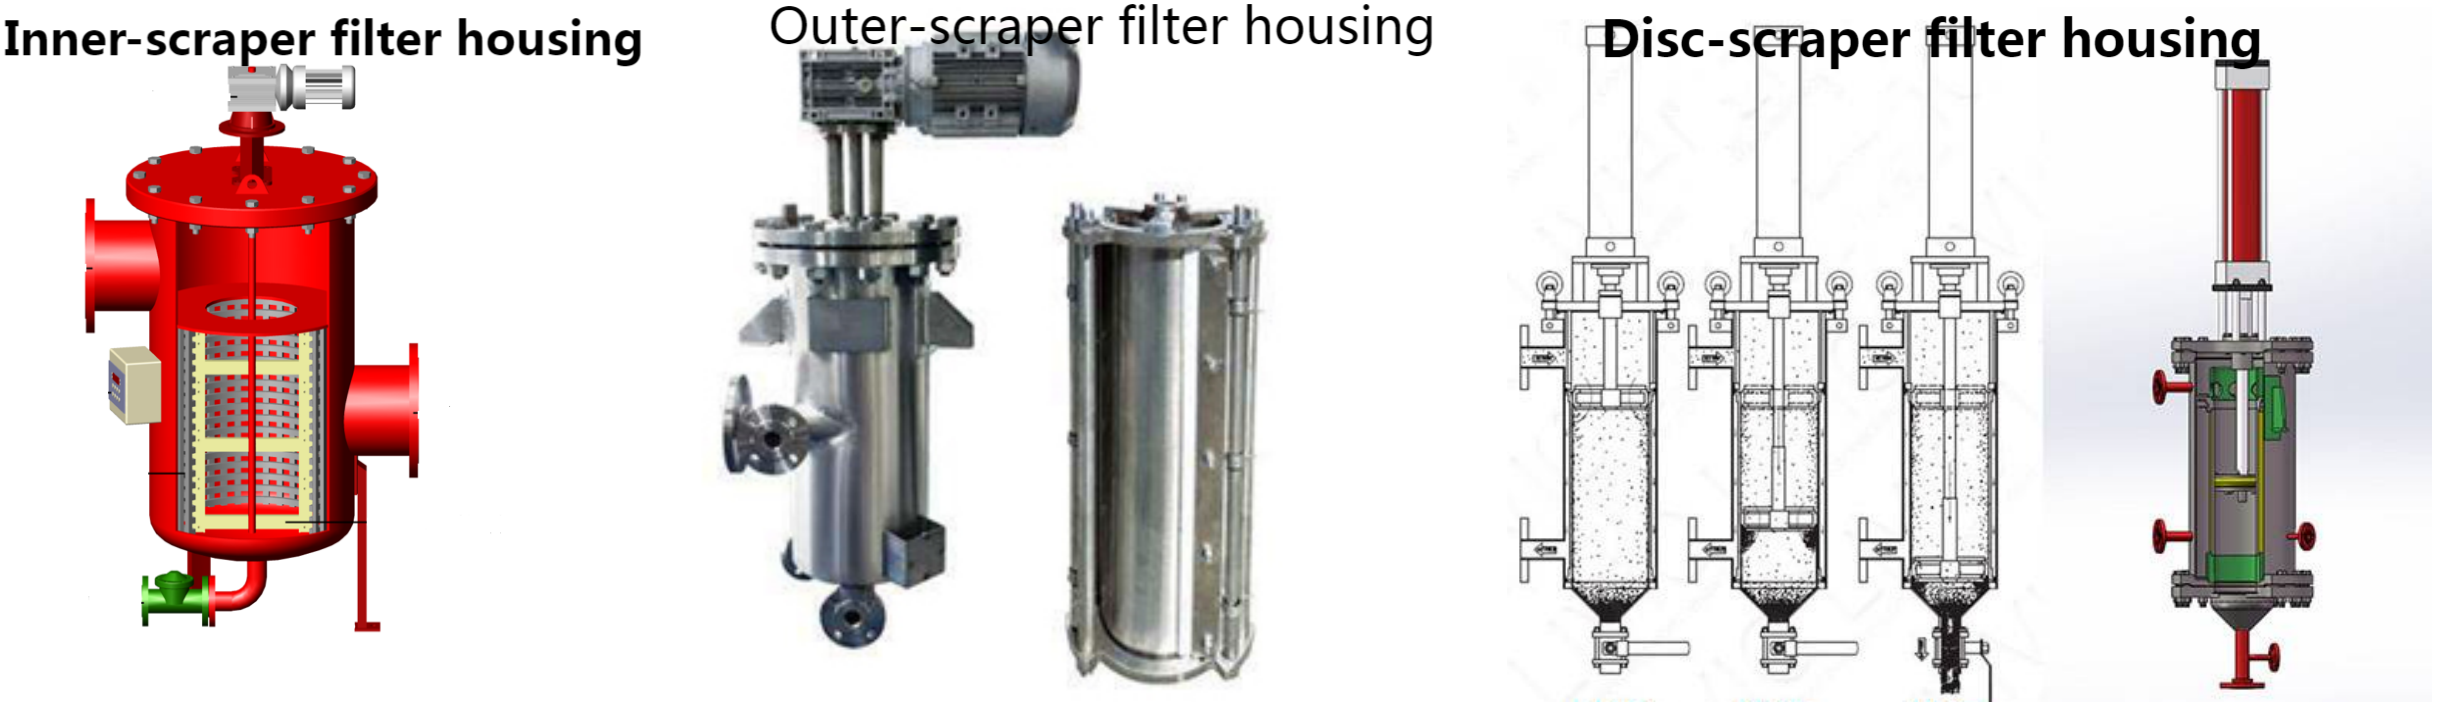 scraper self-cleaning filter housing types